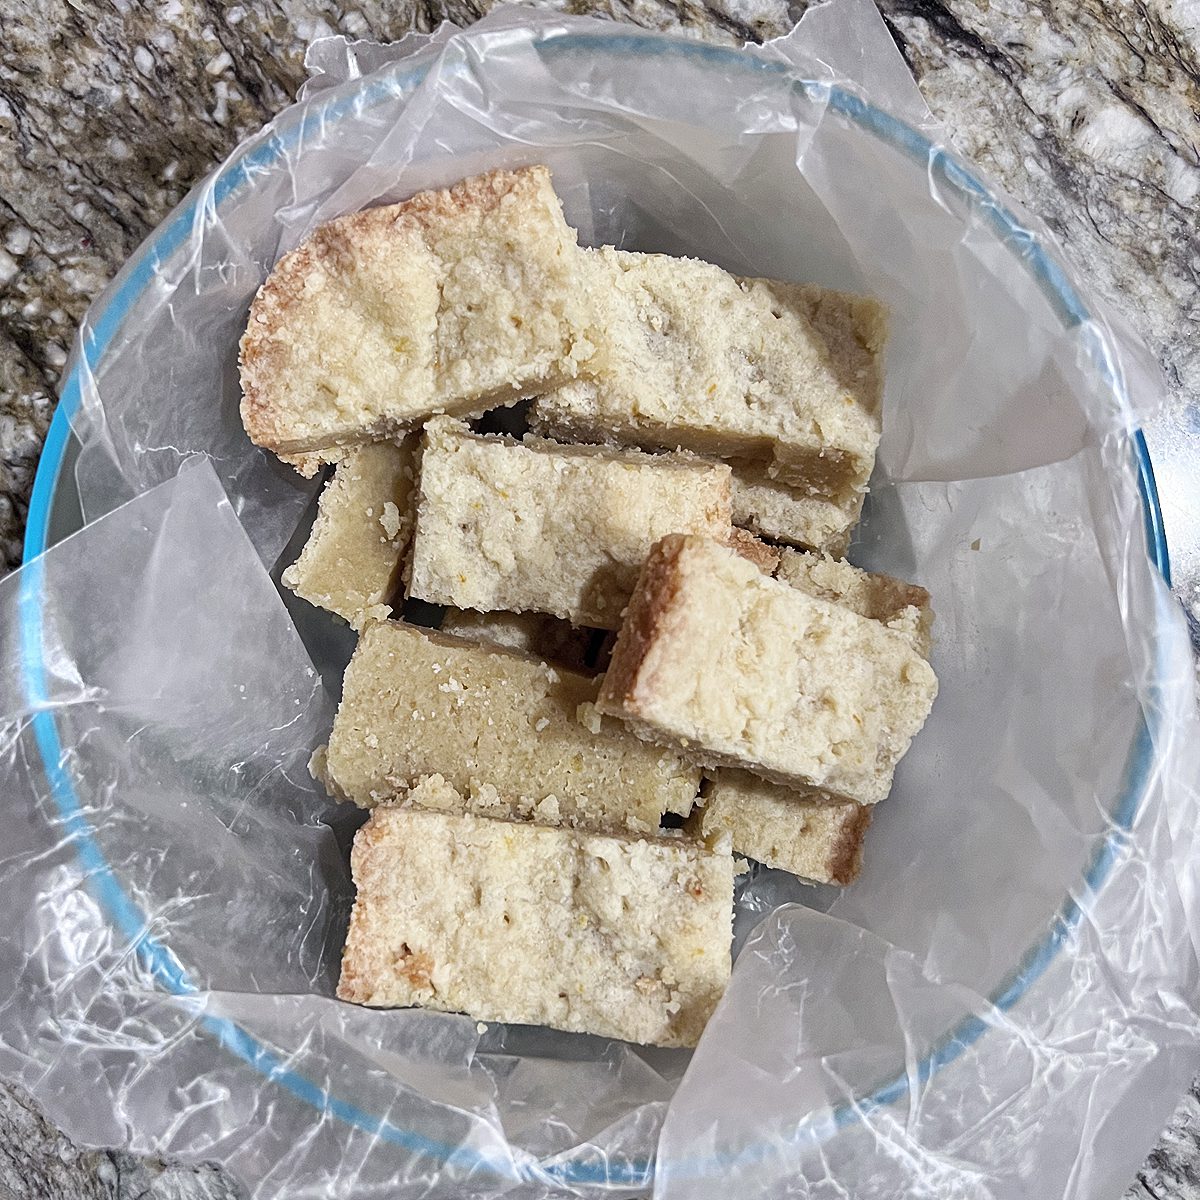 The best shortbread biscuit recipe, shortbread biscuits cut and placed in a bowl.